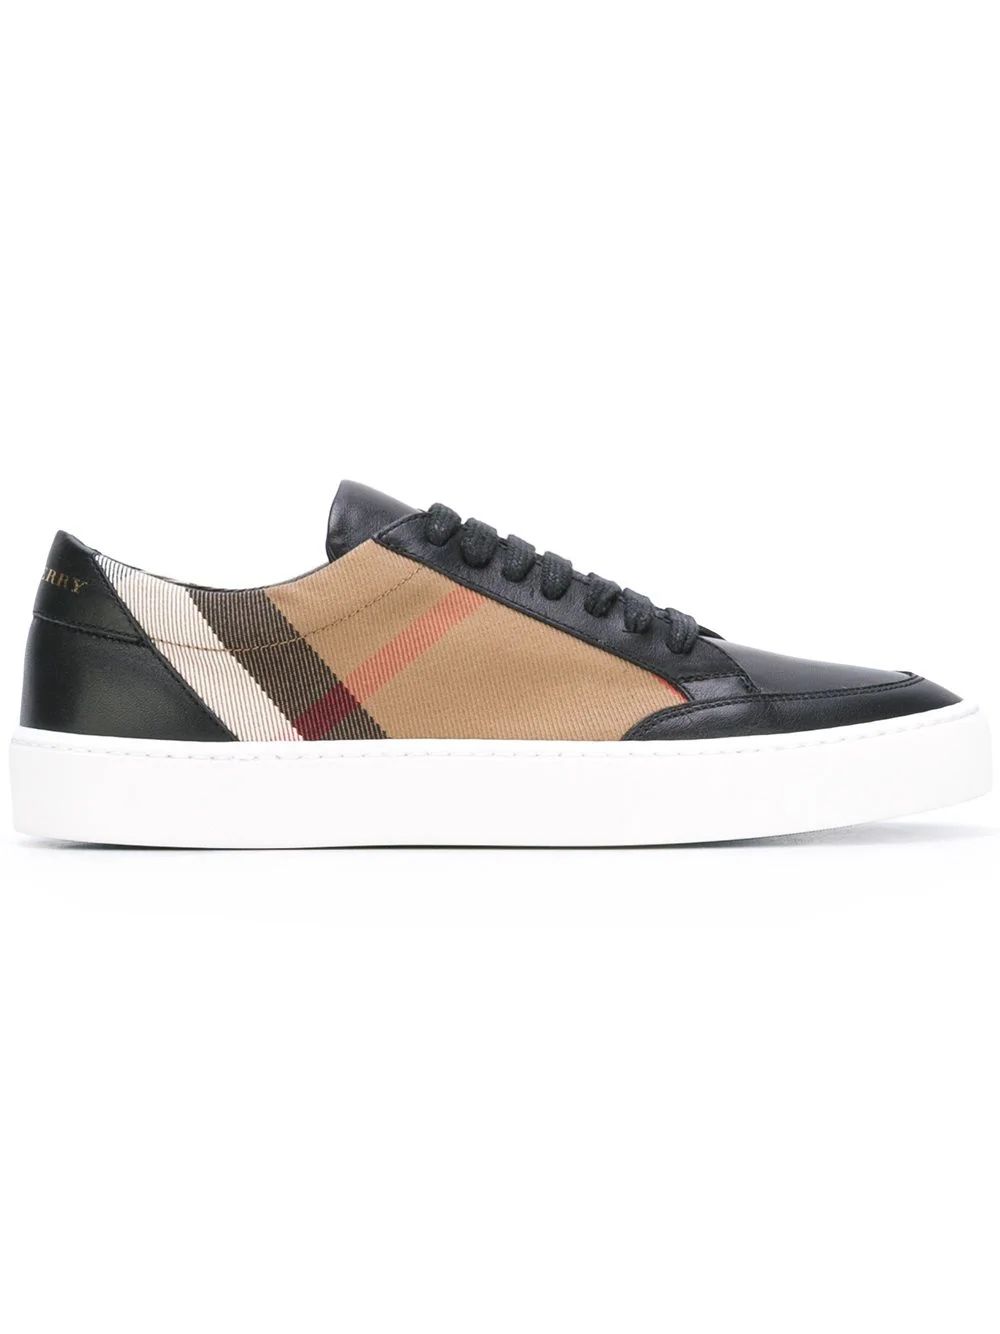 Burberry Check Detail Leather Sneakers - Black | FarFetch US